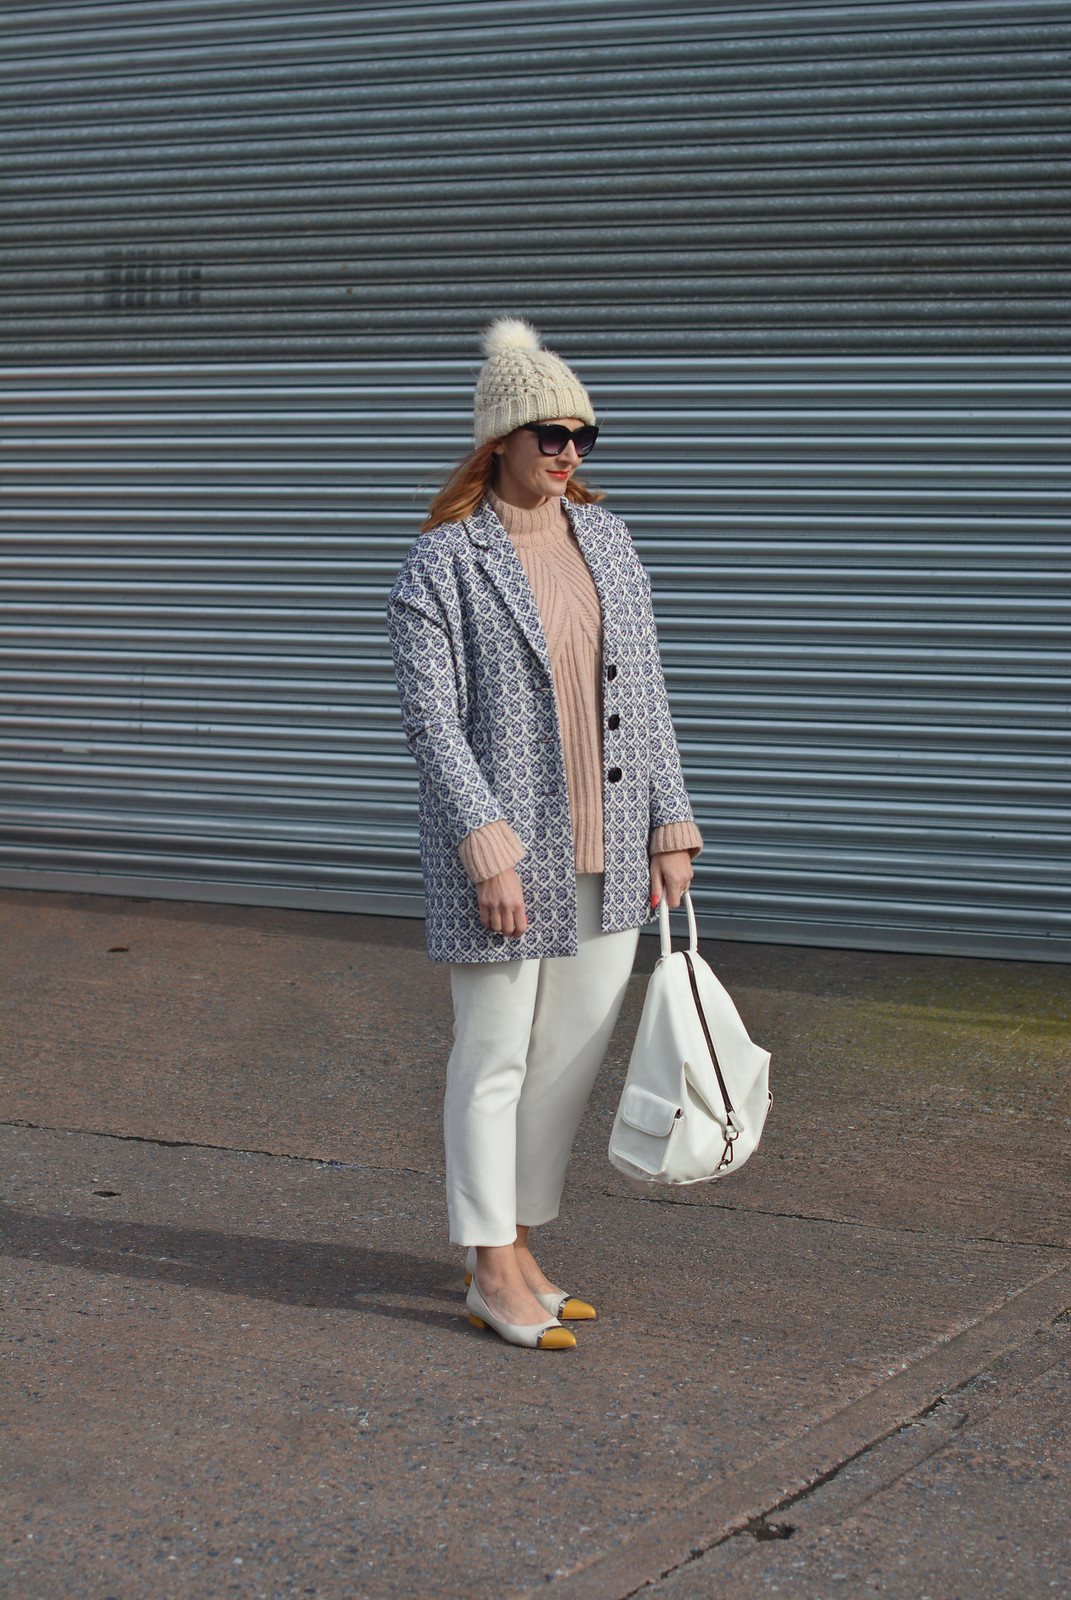 Blush pink, white and blue jaquard winter layers | Not Dressed As Lamb